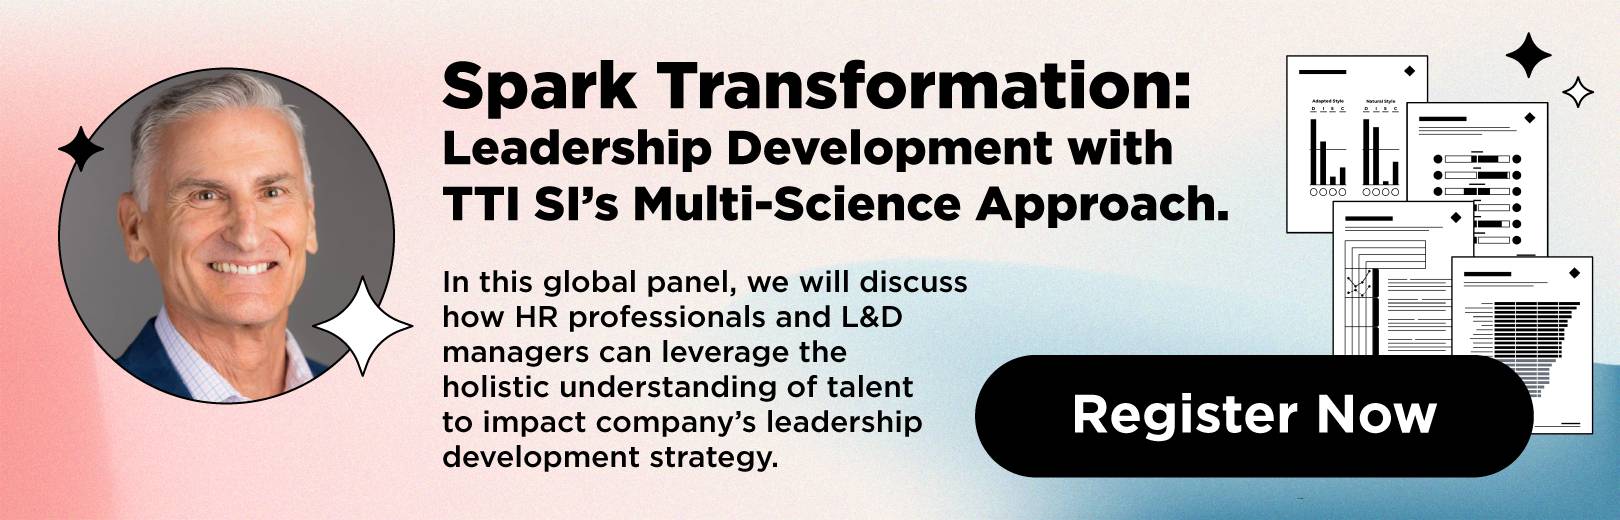 Spark Transformation: Leadership Development with TTI SI’s Multi-Science Approach - Register Now